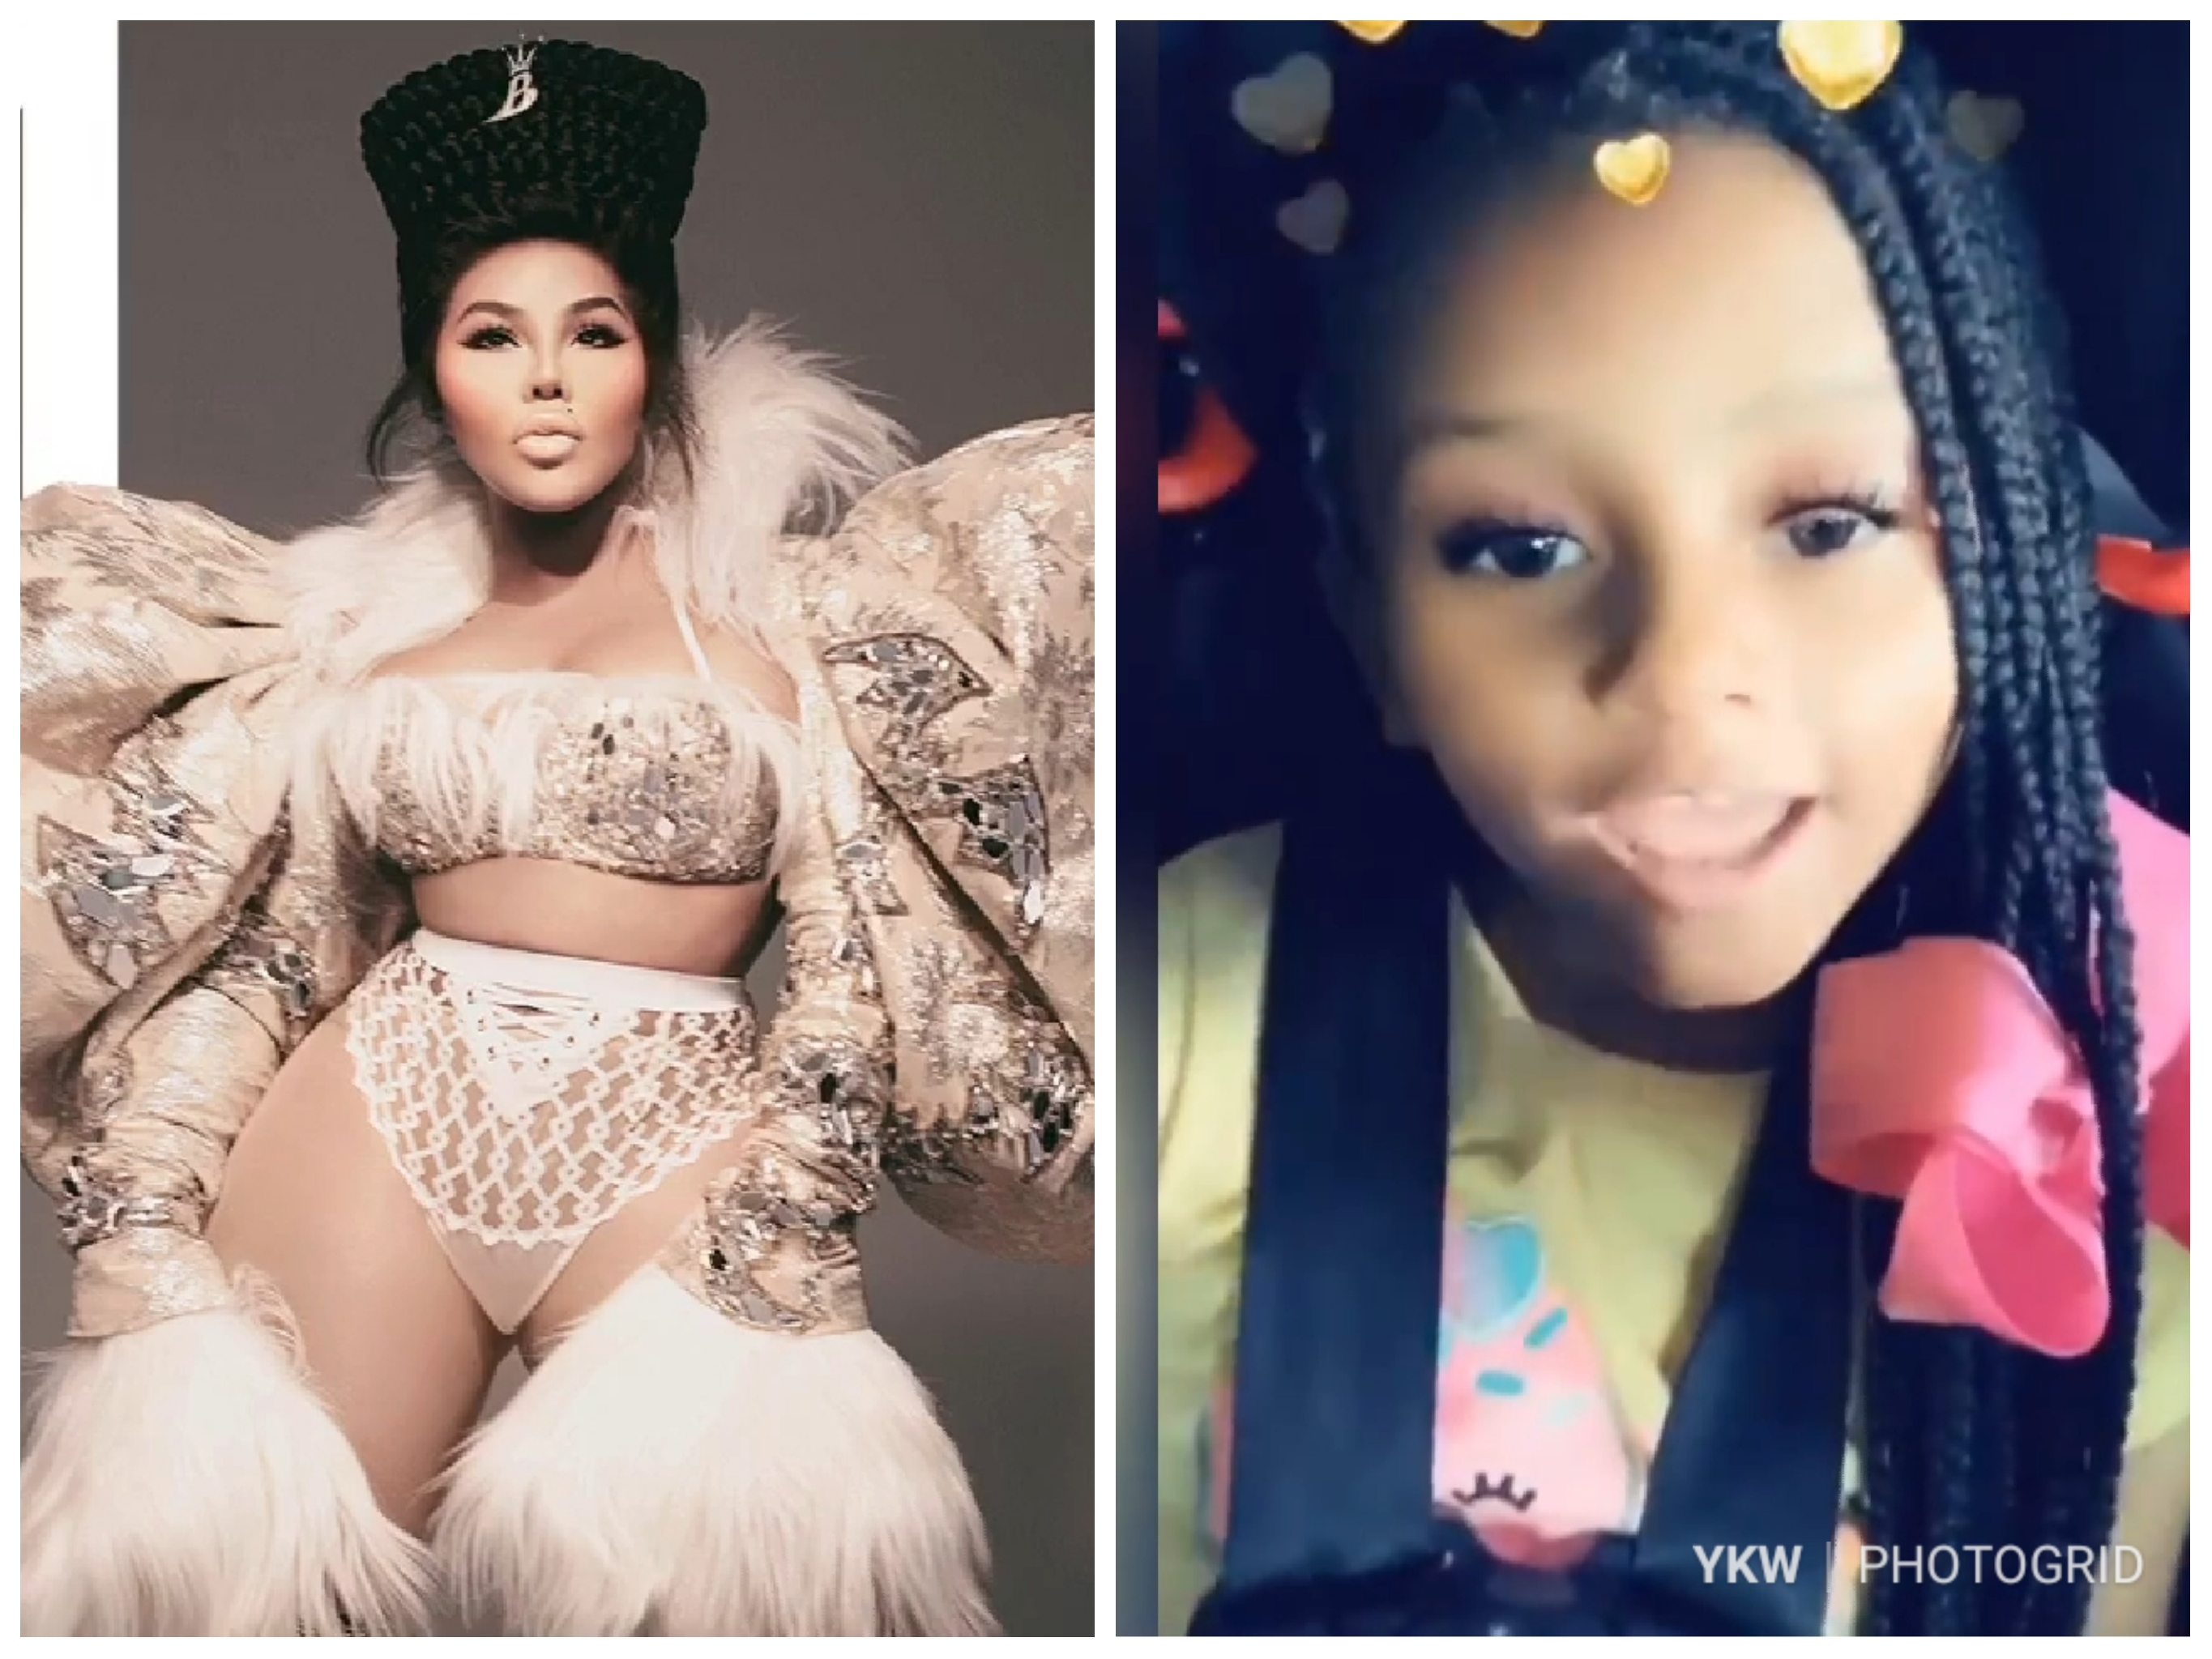 Lil’ Kim Shares Cute Video Of Daughter Royal Reign Promoting Album “9”